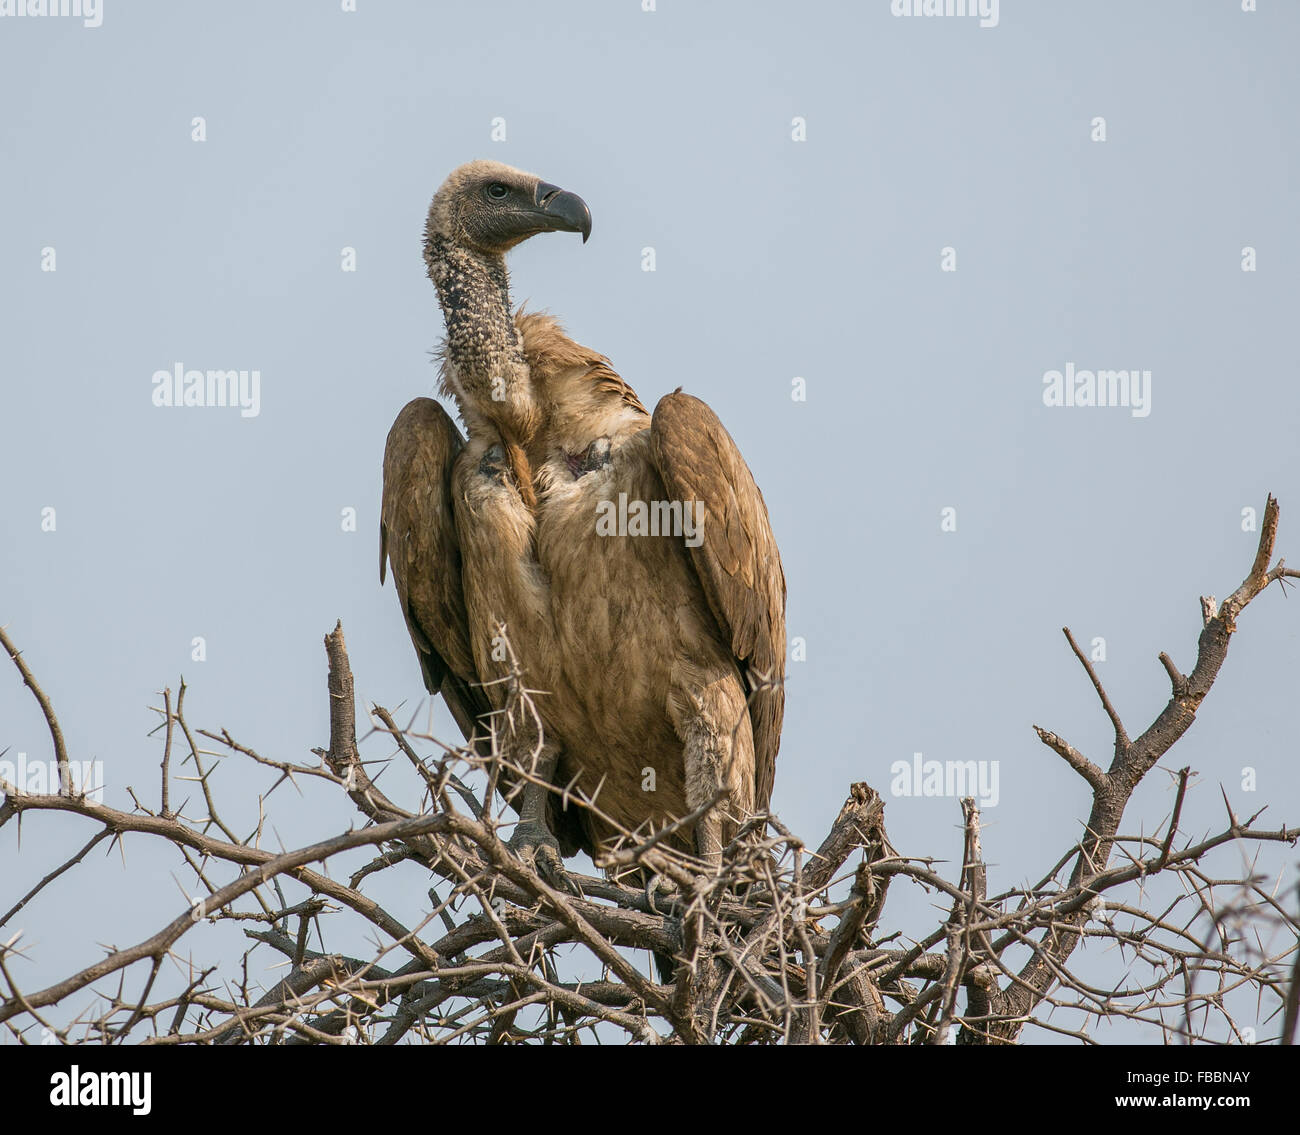 White-backed vulture (Gyps africanus) perched high in a thorny tree, Chobe National Park, Botswana, Africa Stock Photo